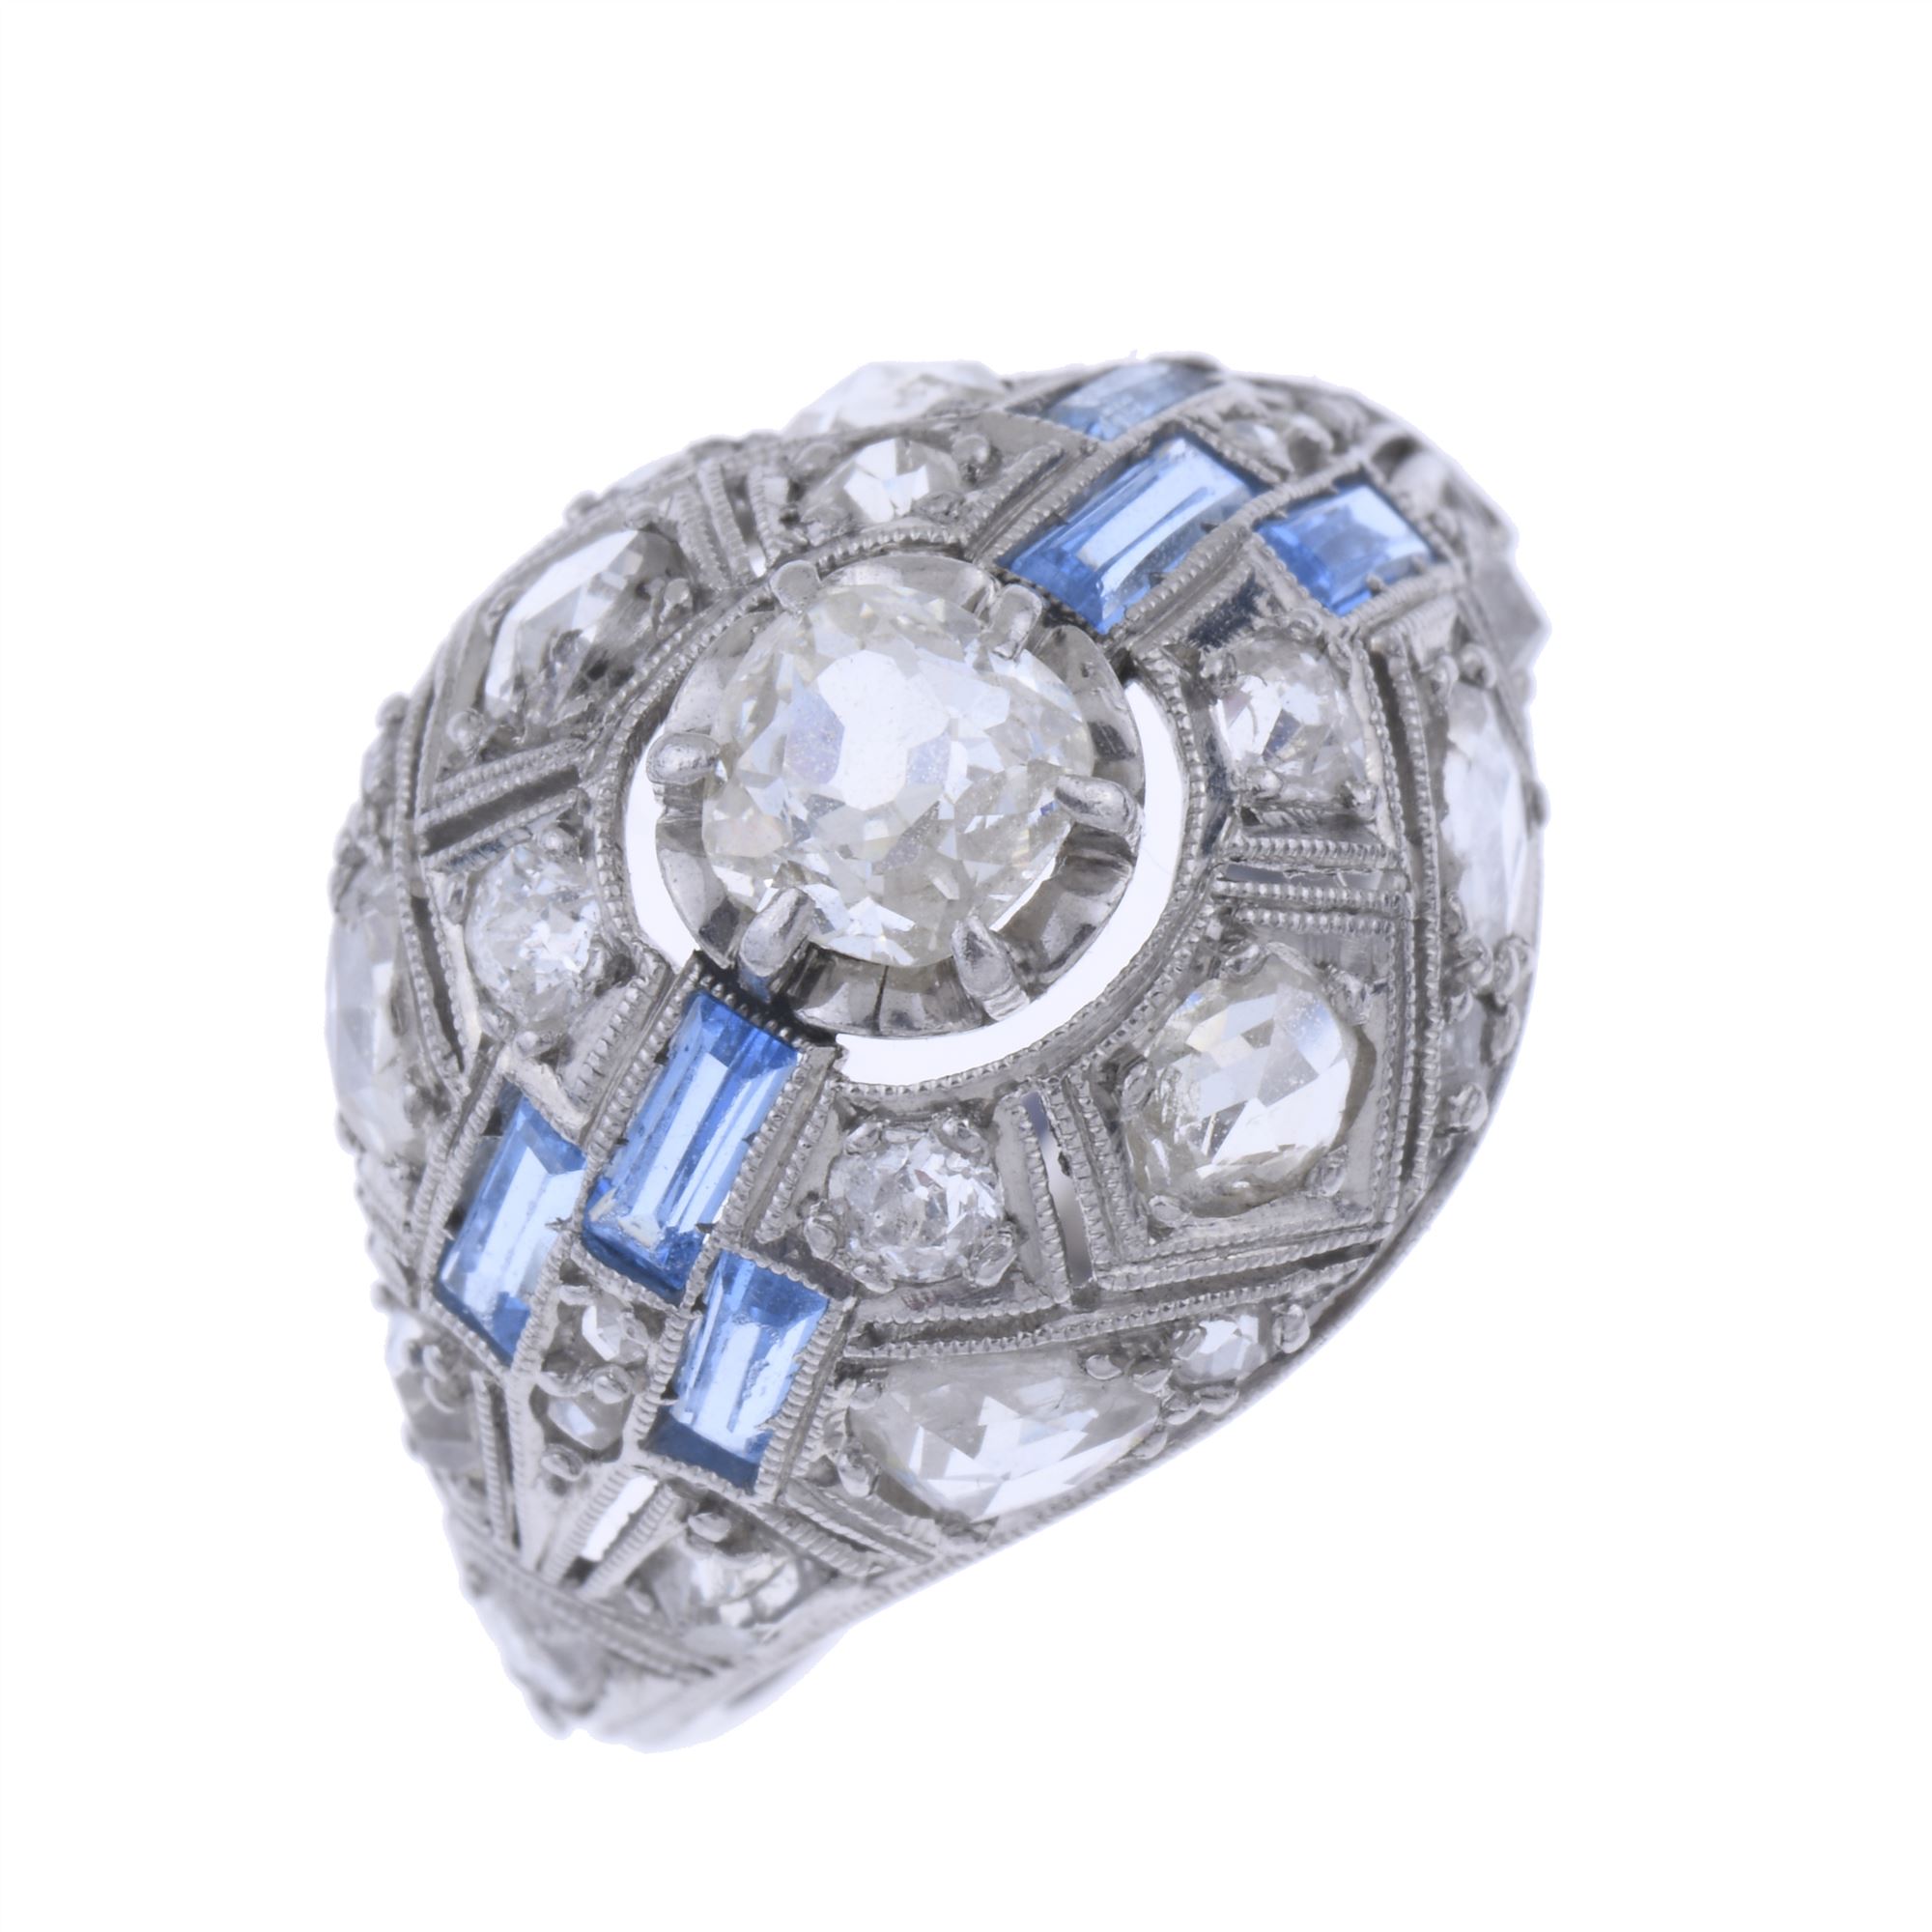 ART DECO RING WITH DIAMONDS AND SAPPHIRES.